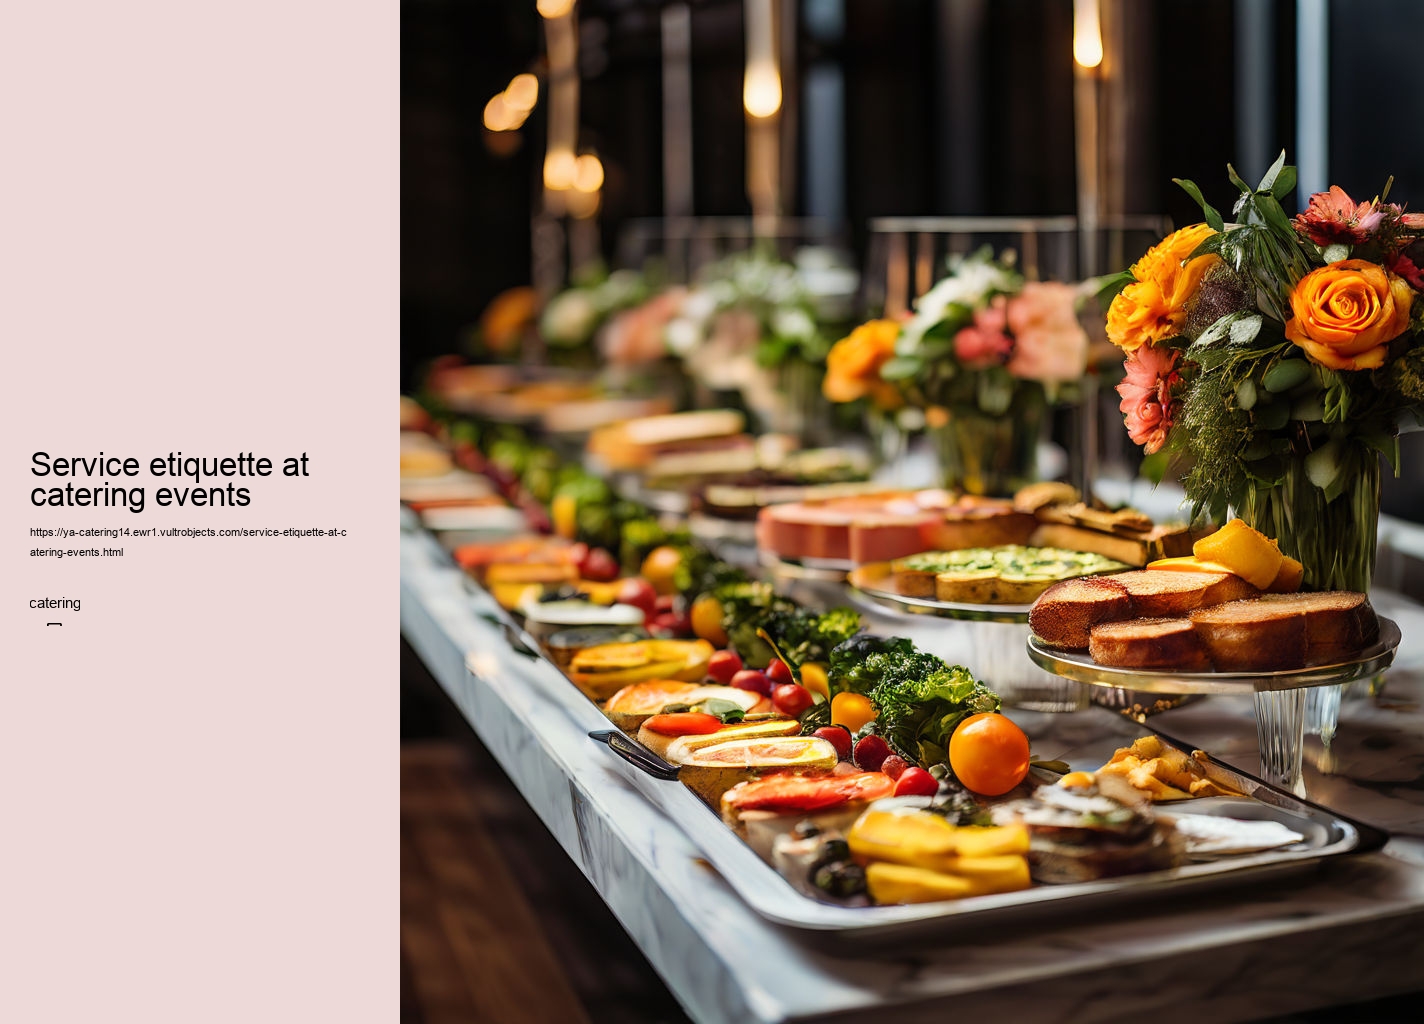 Service etiquette at catering events